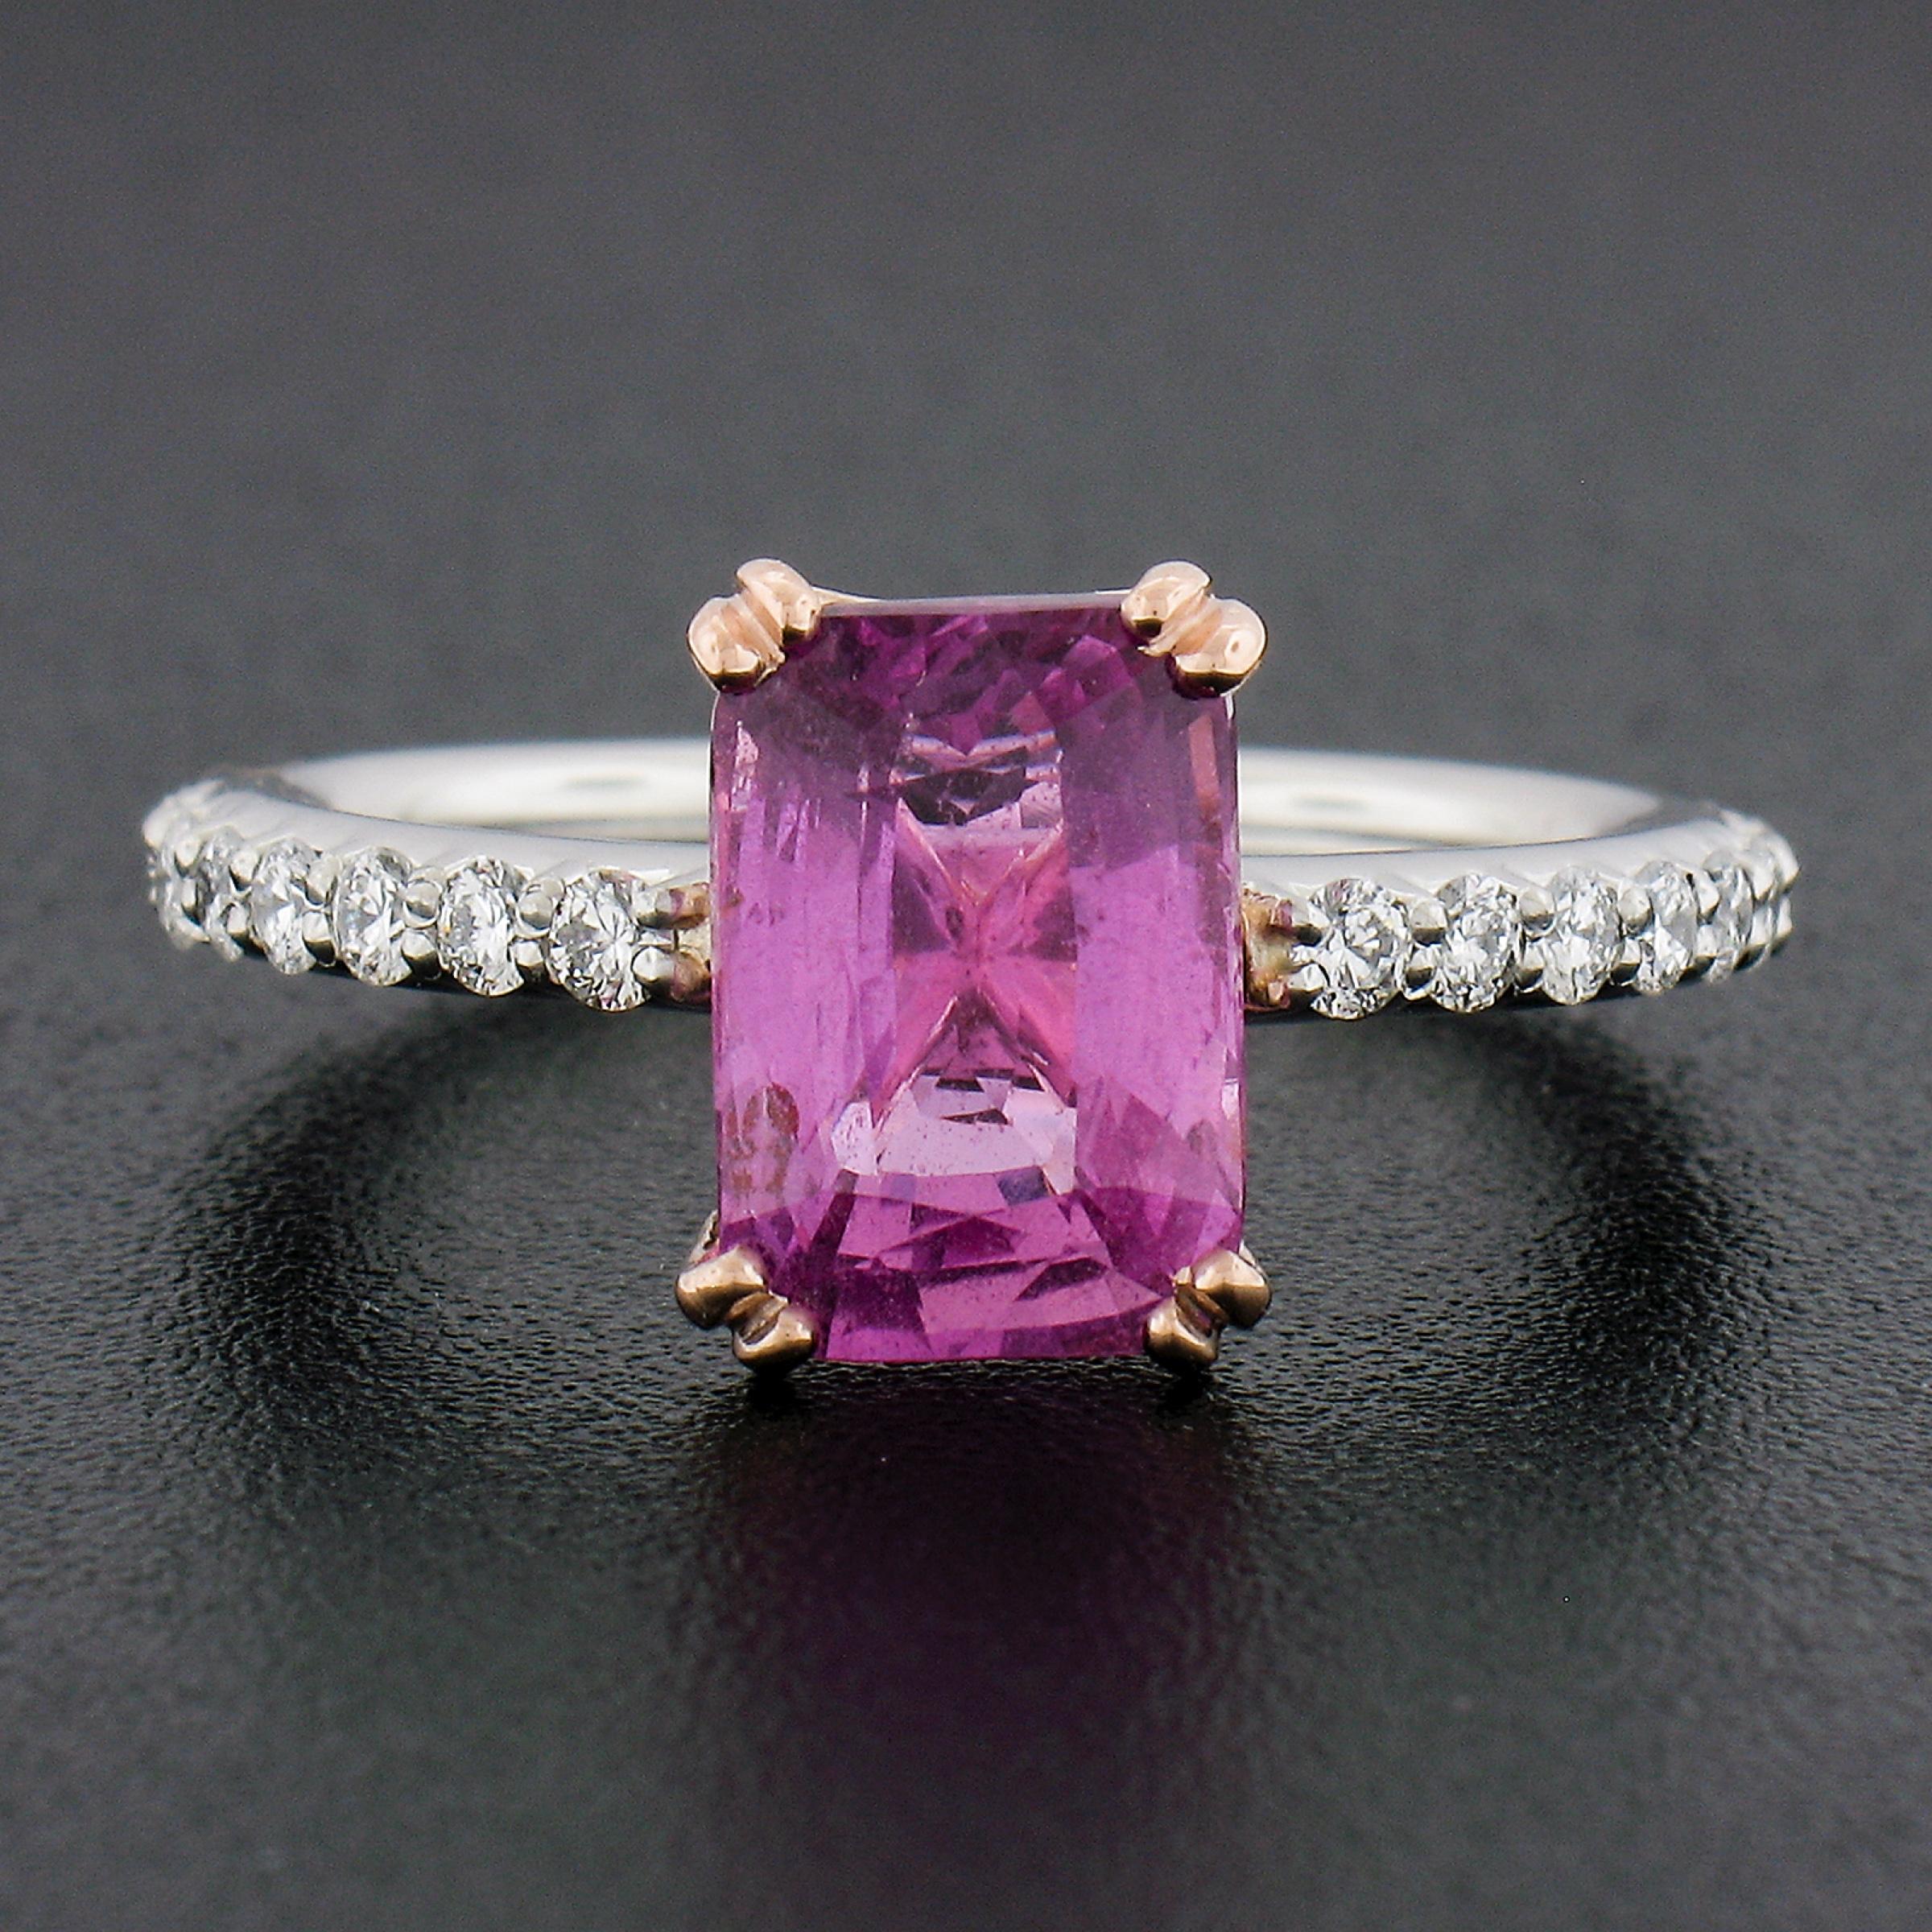 New Platinum & 14k Gold 3.61ct GIA No Heat Pink Sapphire Diamond Solitaire Ring In New Condition For Sale In Montclair, NJ